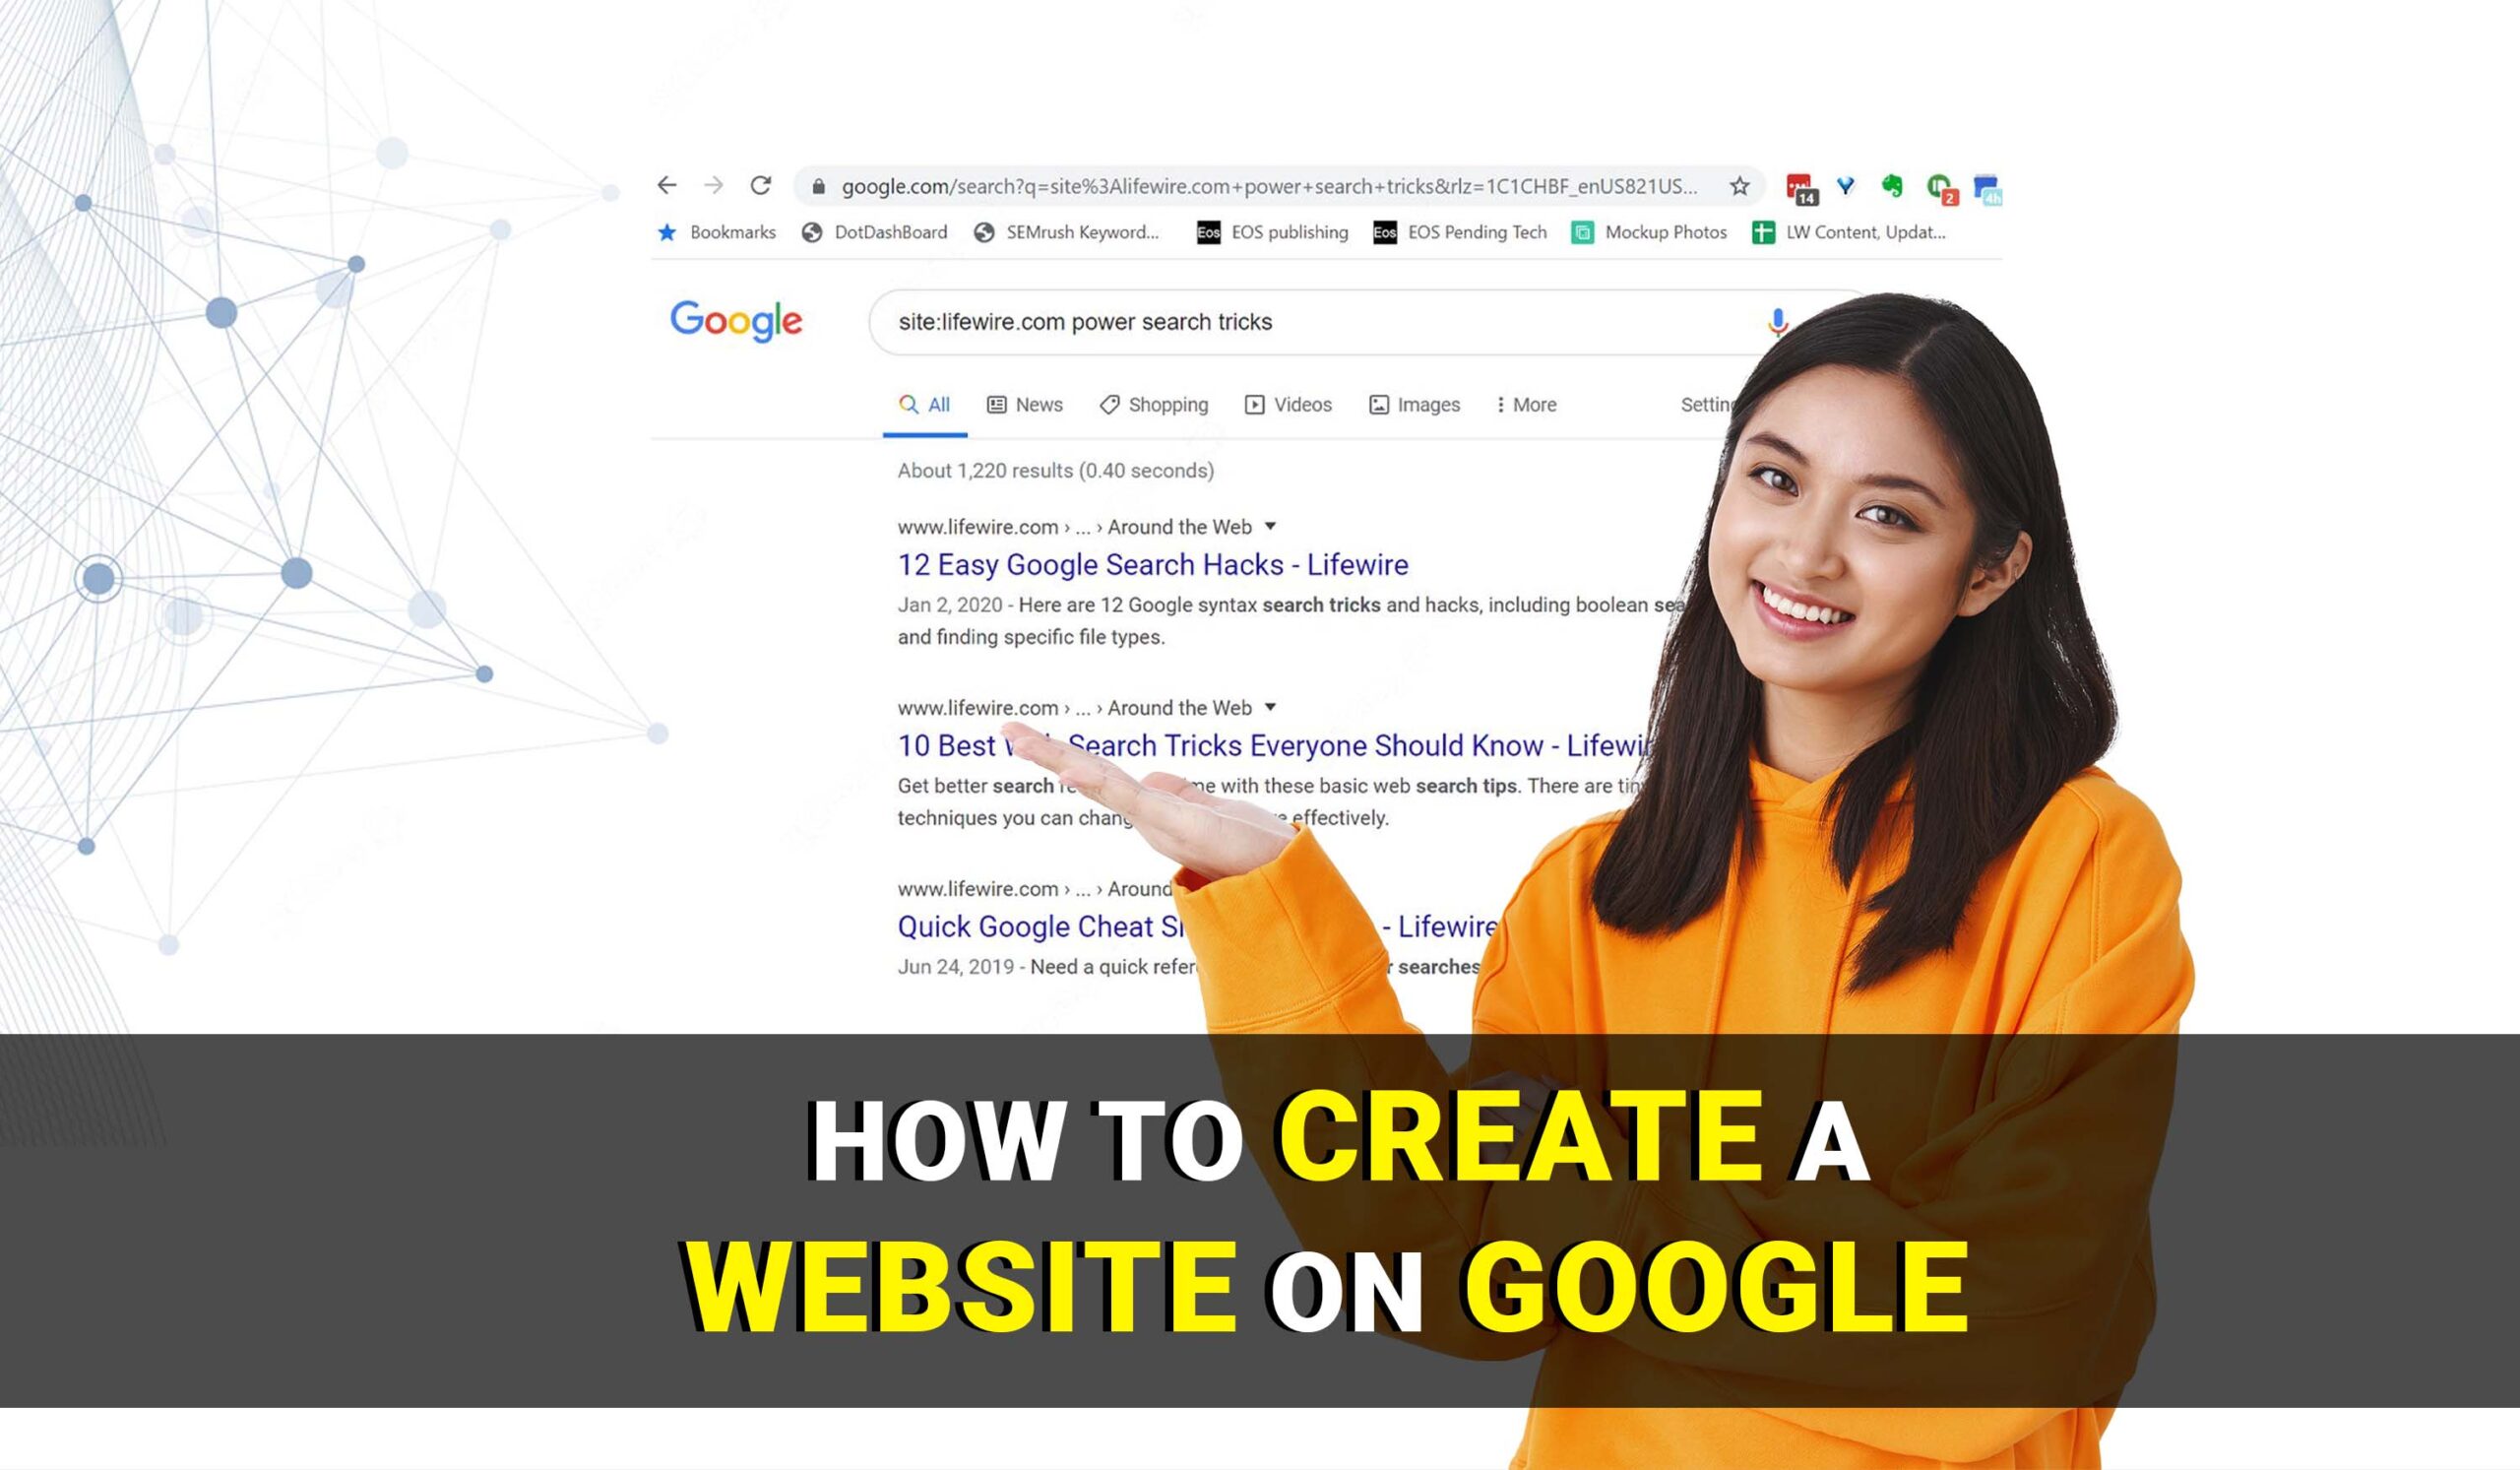 How to create a website on Google